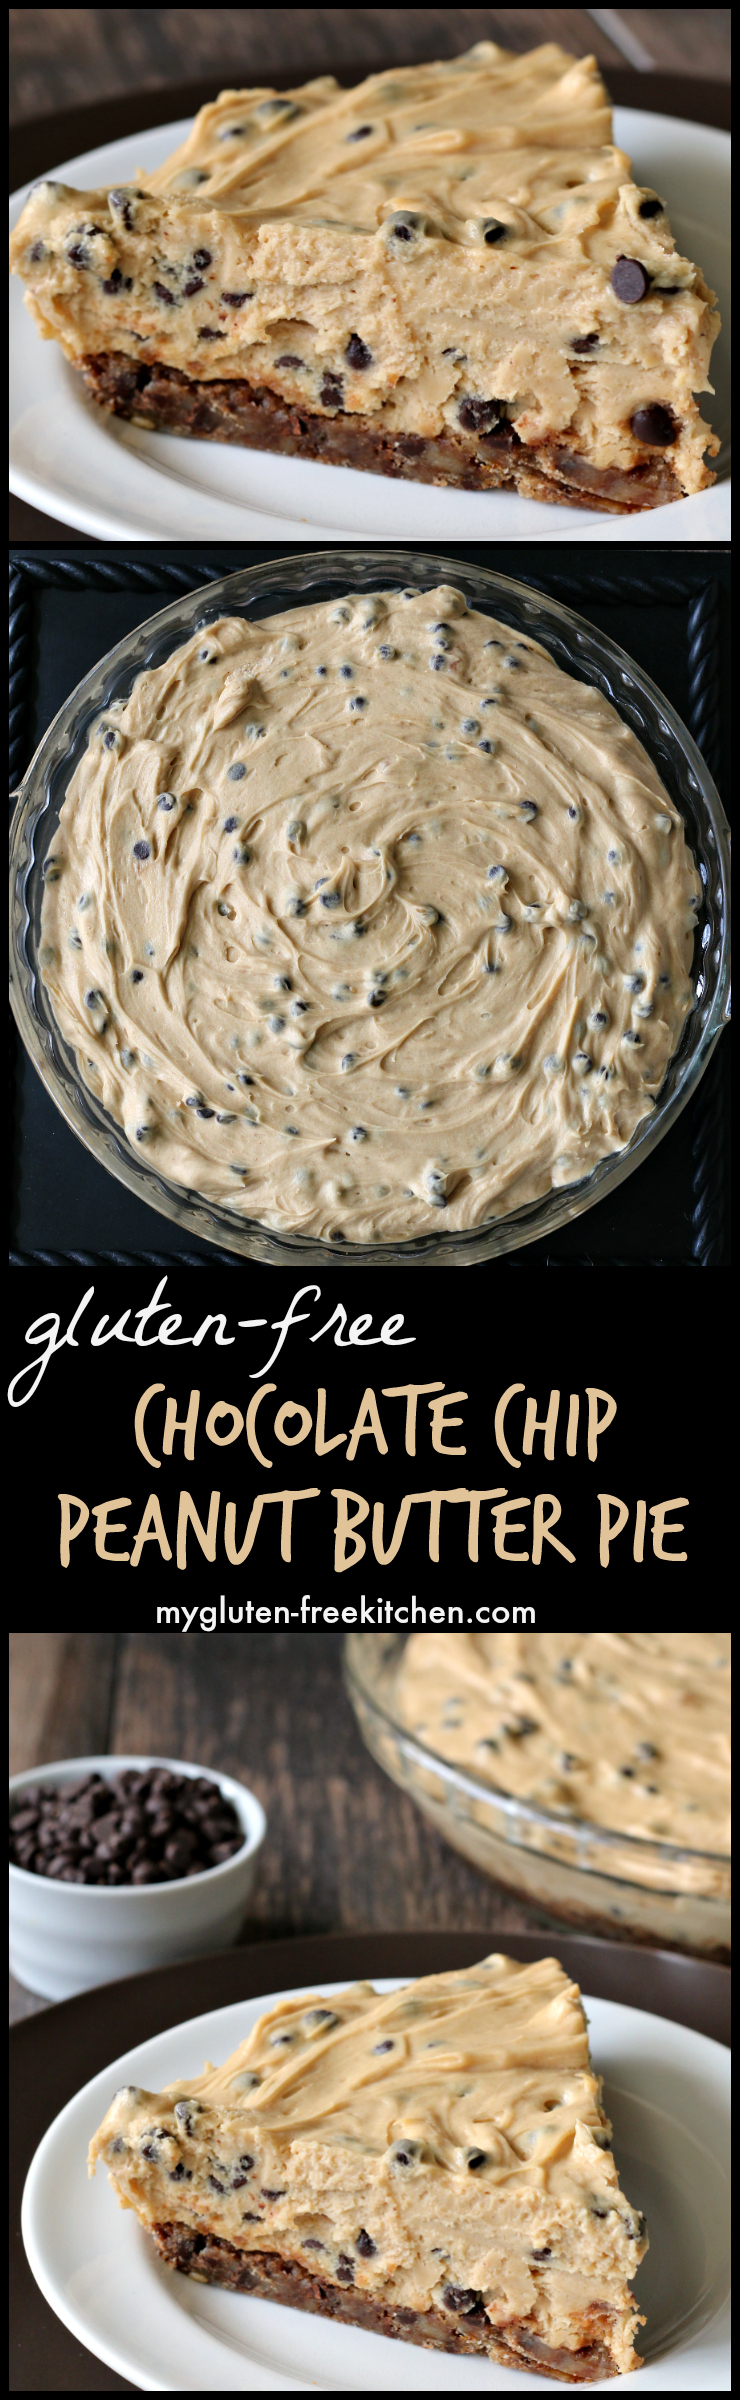 Gluten-free Chocolate Chip Peanut Butter Pie with a chocolate chip cookie crust